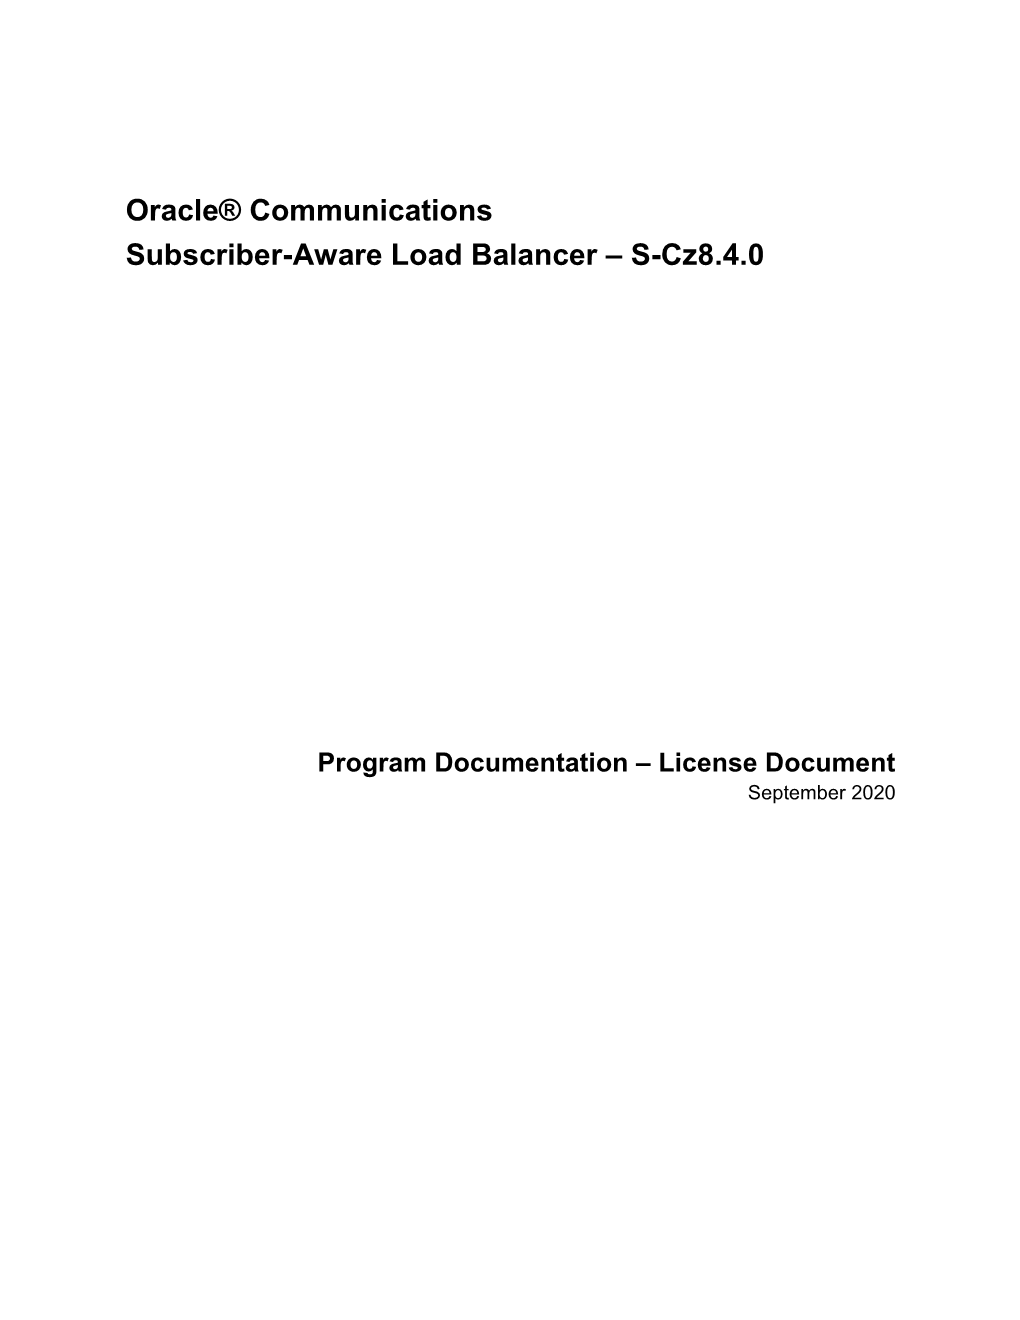 Oracle® Communications Subscriber-Aware Load Balancer – S-Cz8.4.0